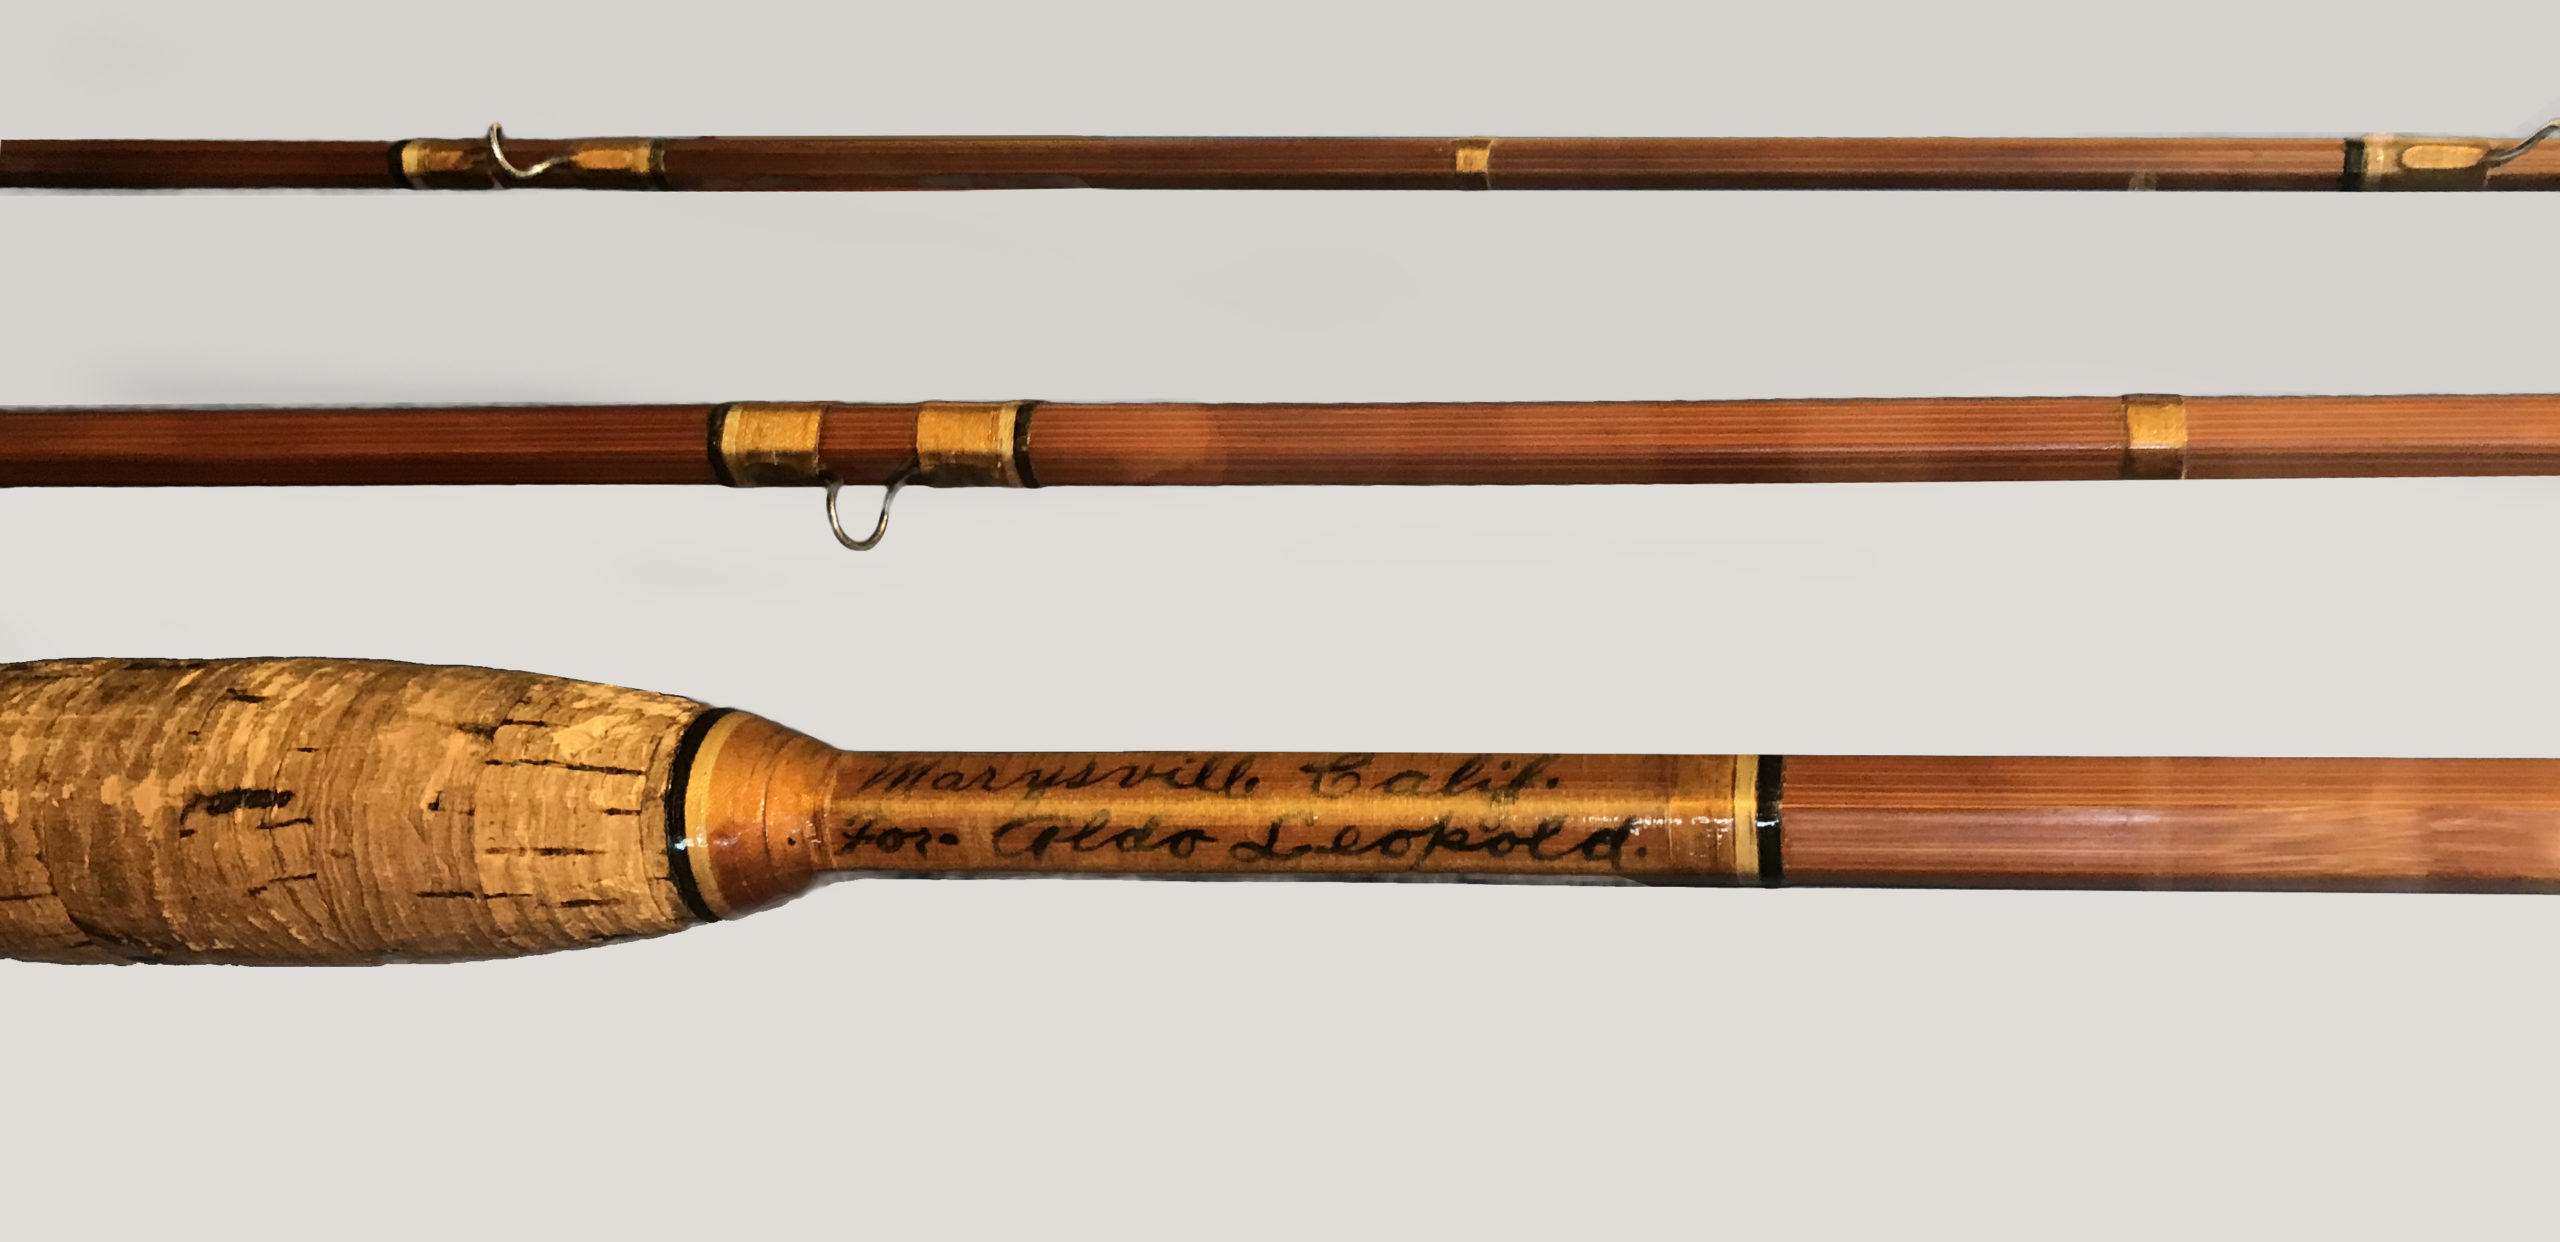 Aldo Leopold's Fly Rod - American Museum Of Fly Fishing